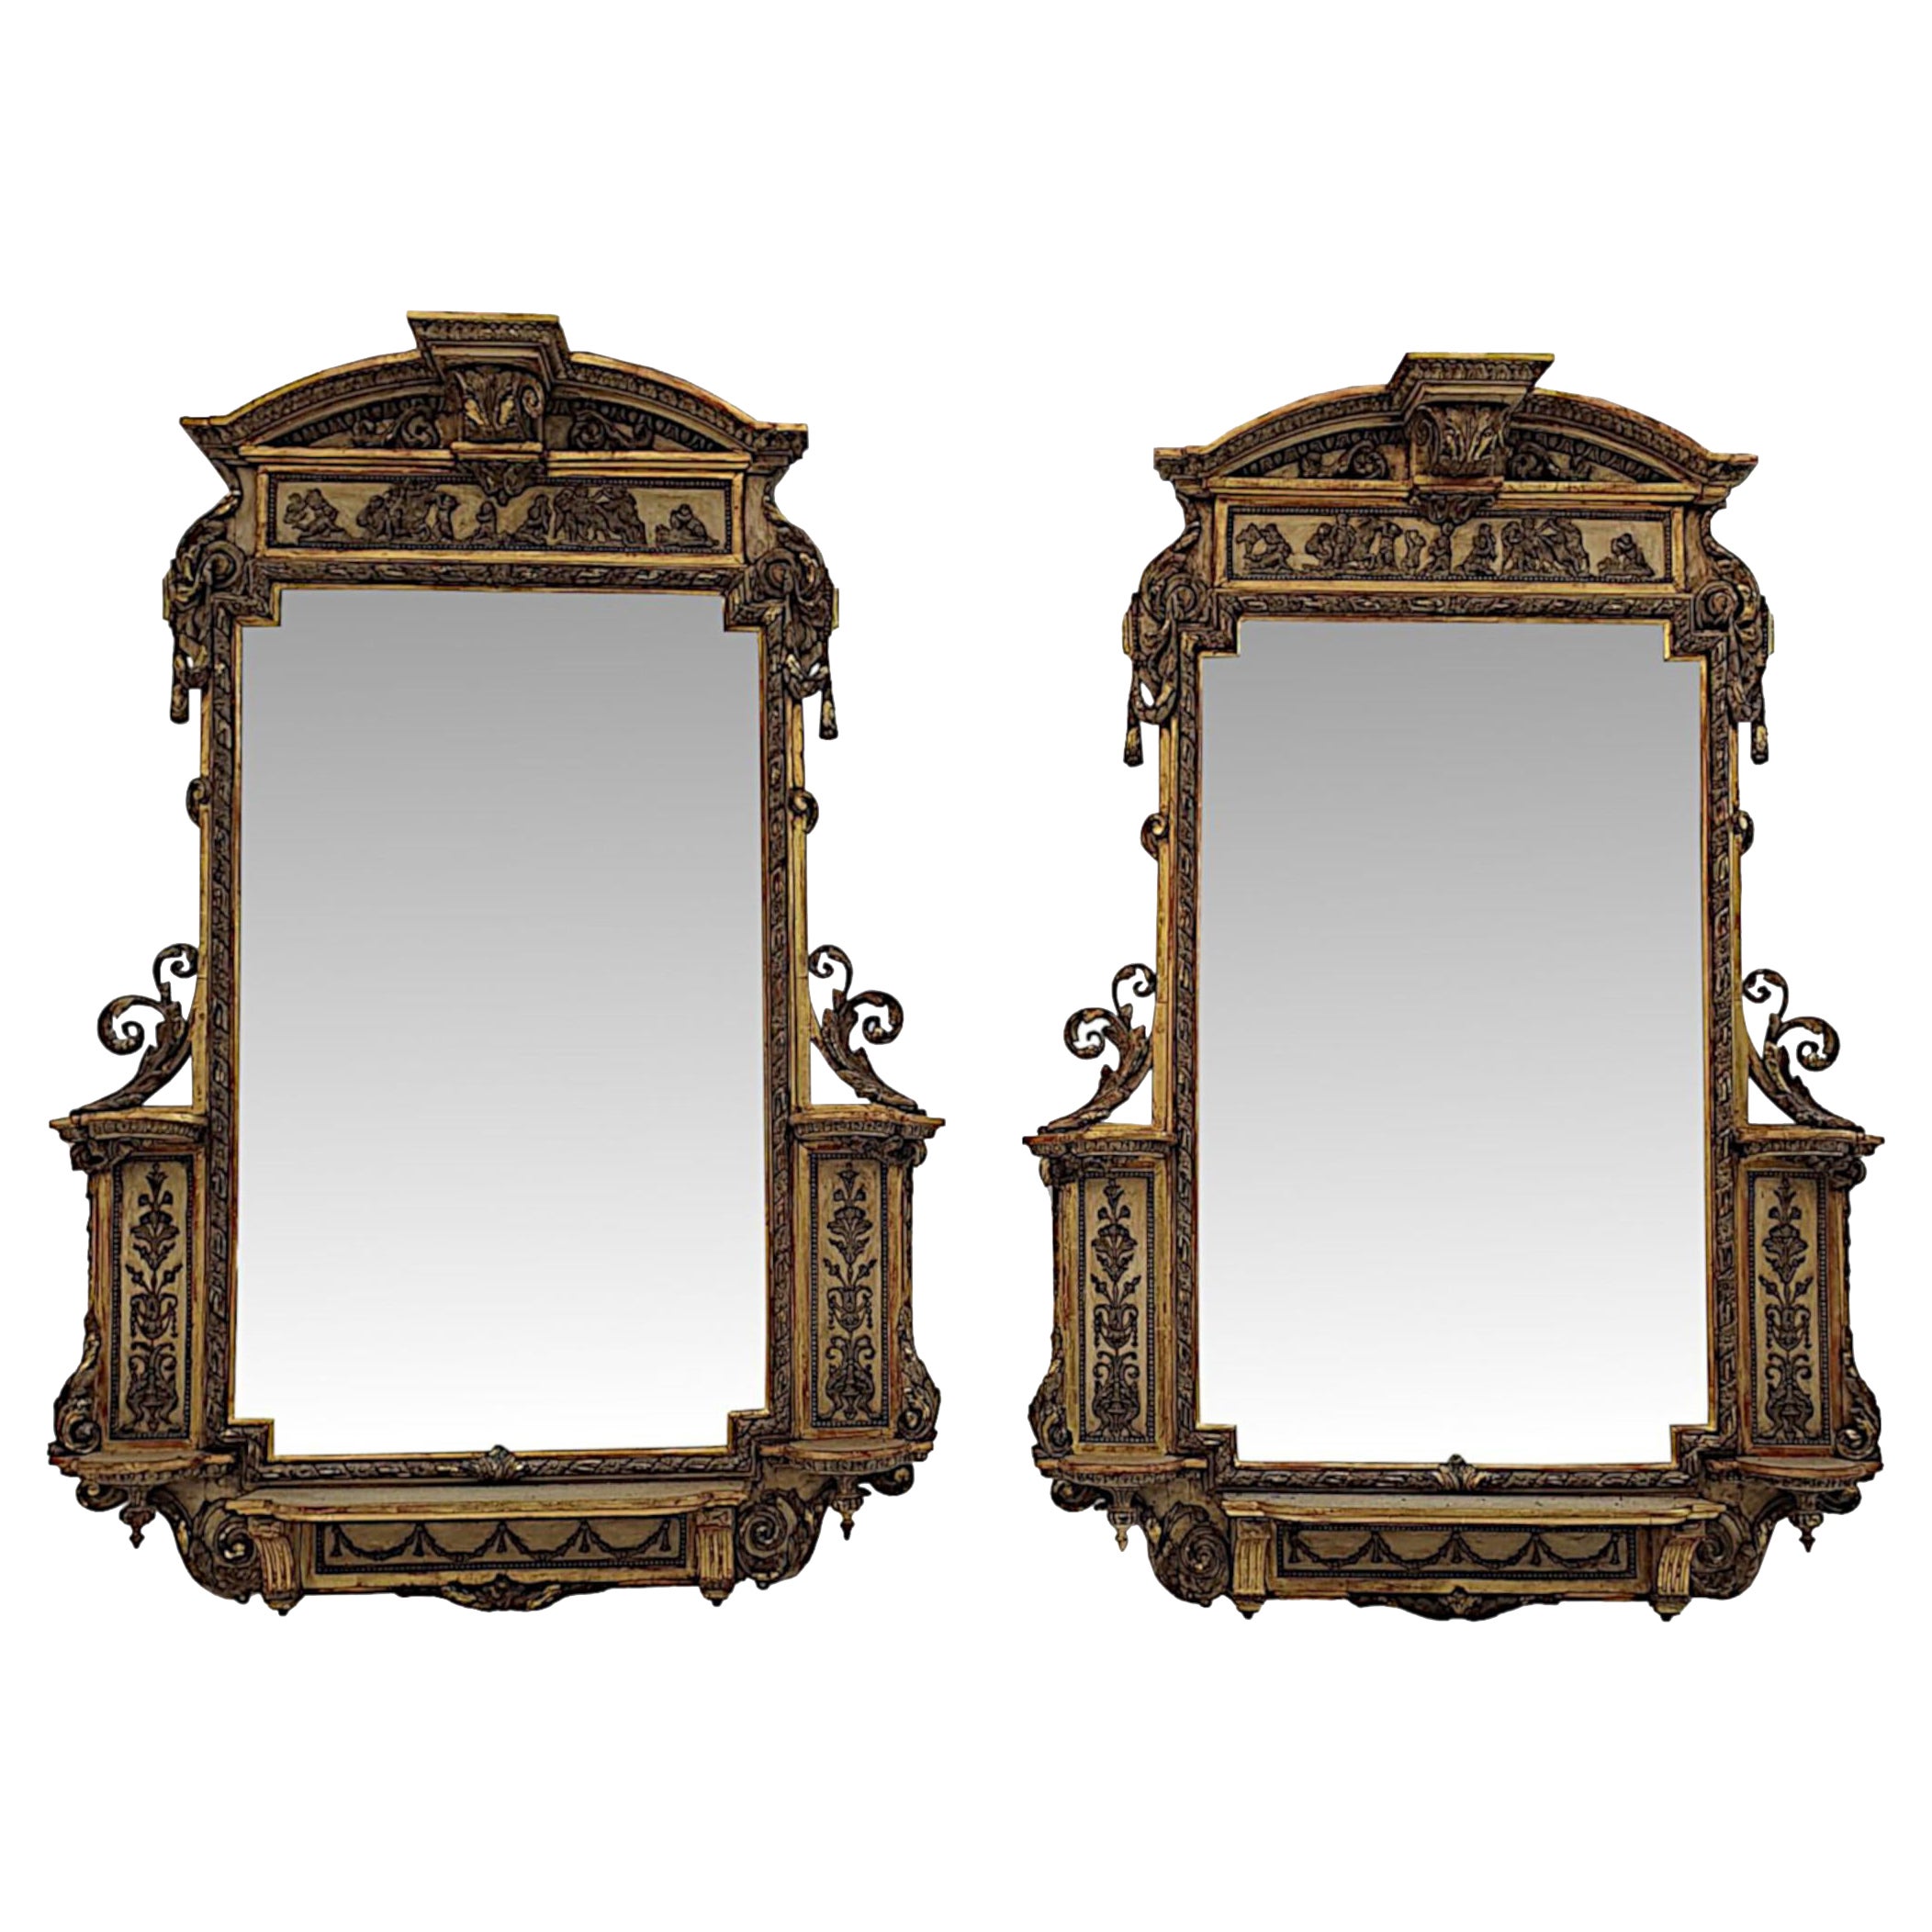 Exceptionally Rare Pair of  Stunning 19th Century Giltwood Mirrors